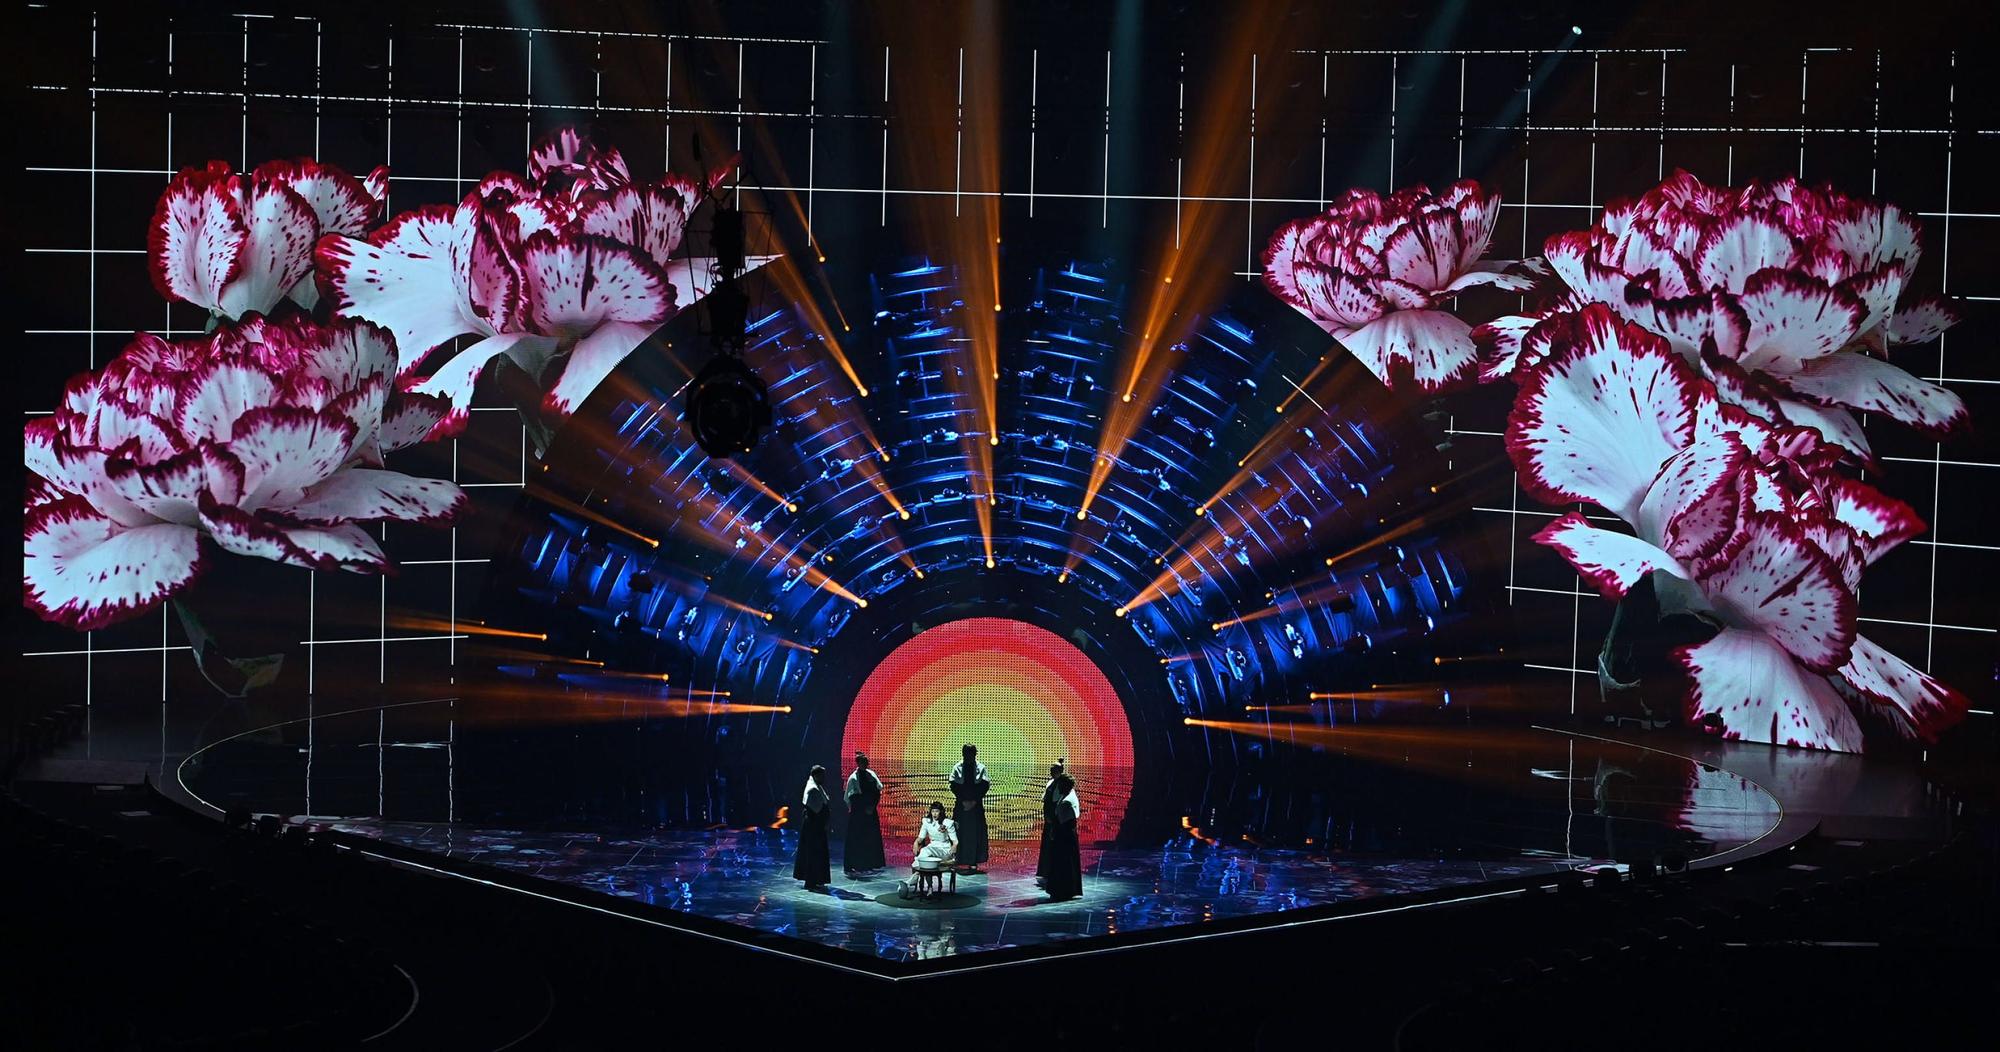 Second Semi-Final - 66th Eurovision Song Contest in Turin